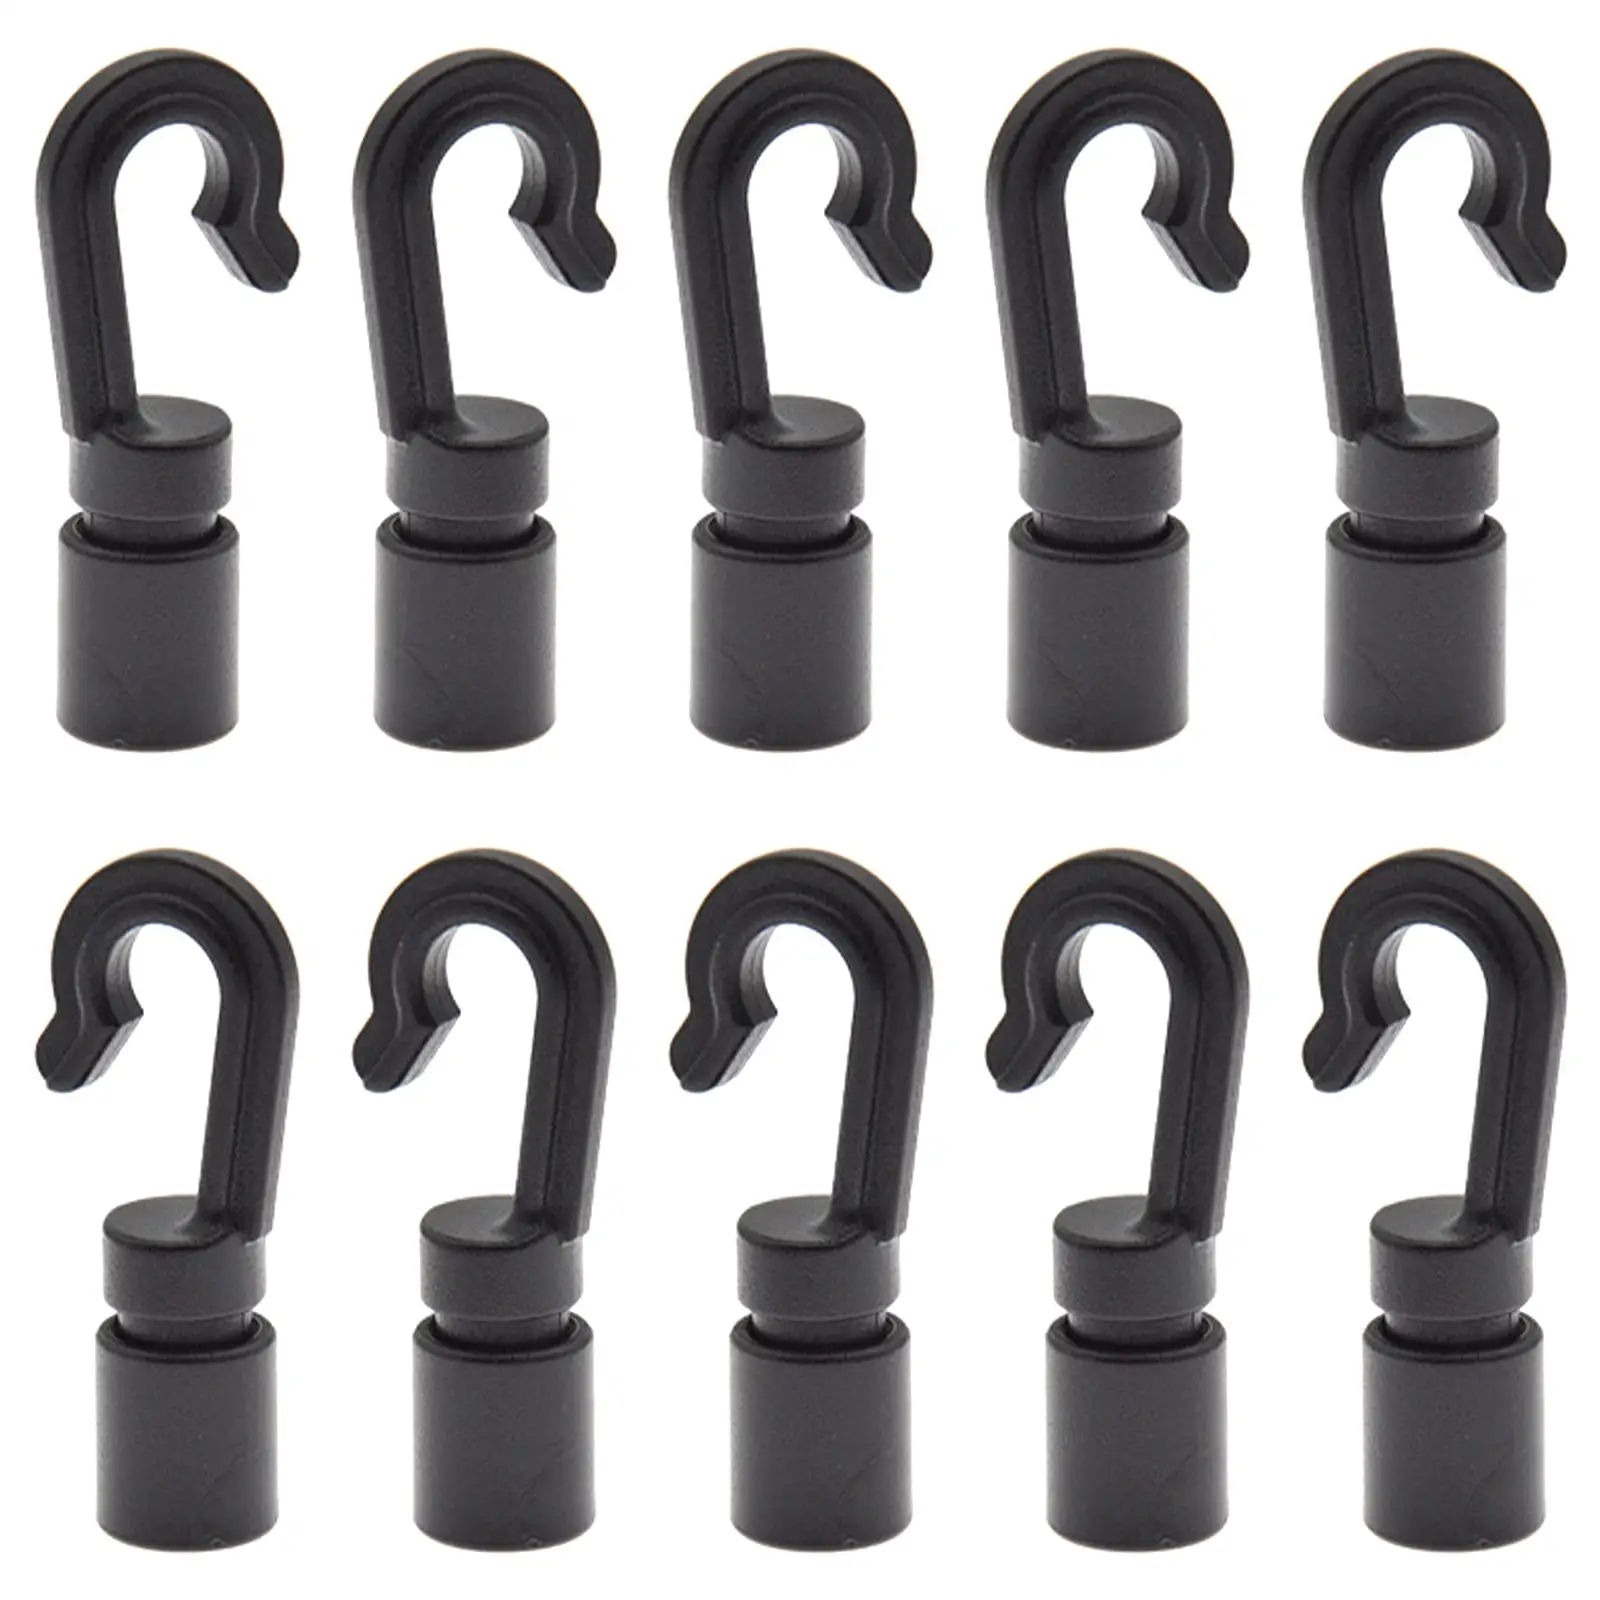 10 Cord Hooks Rope Terminal Ends Plastic for Resistance Bands Kayaks